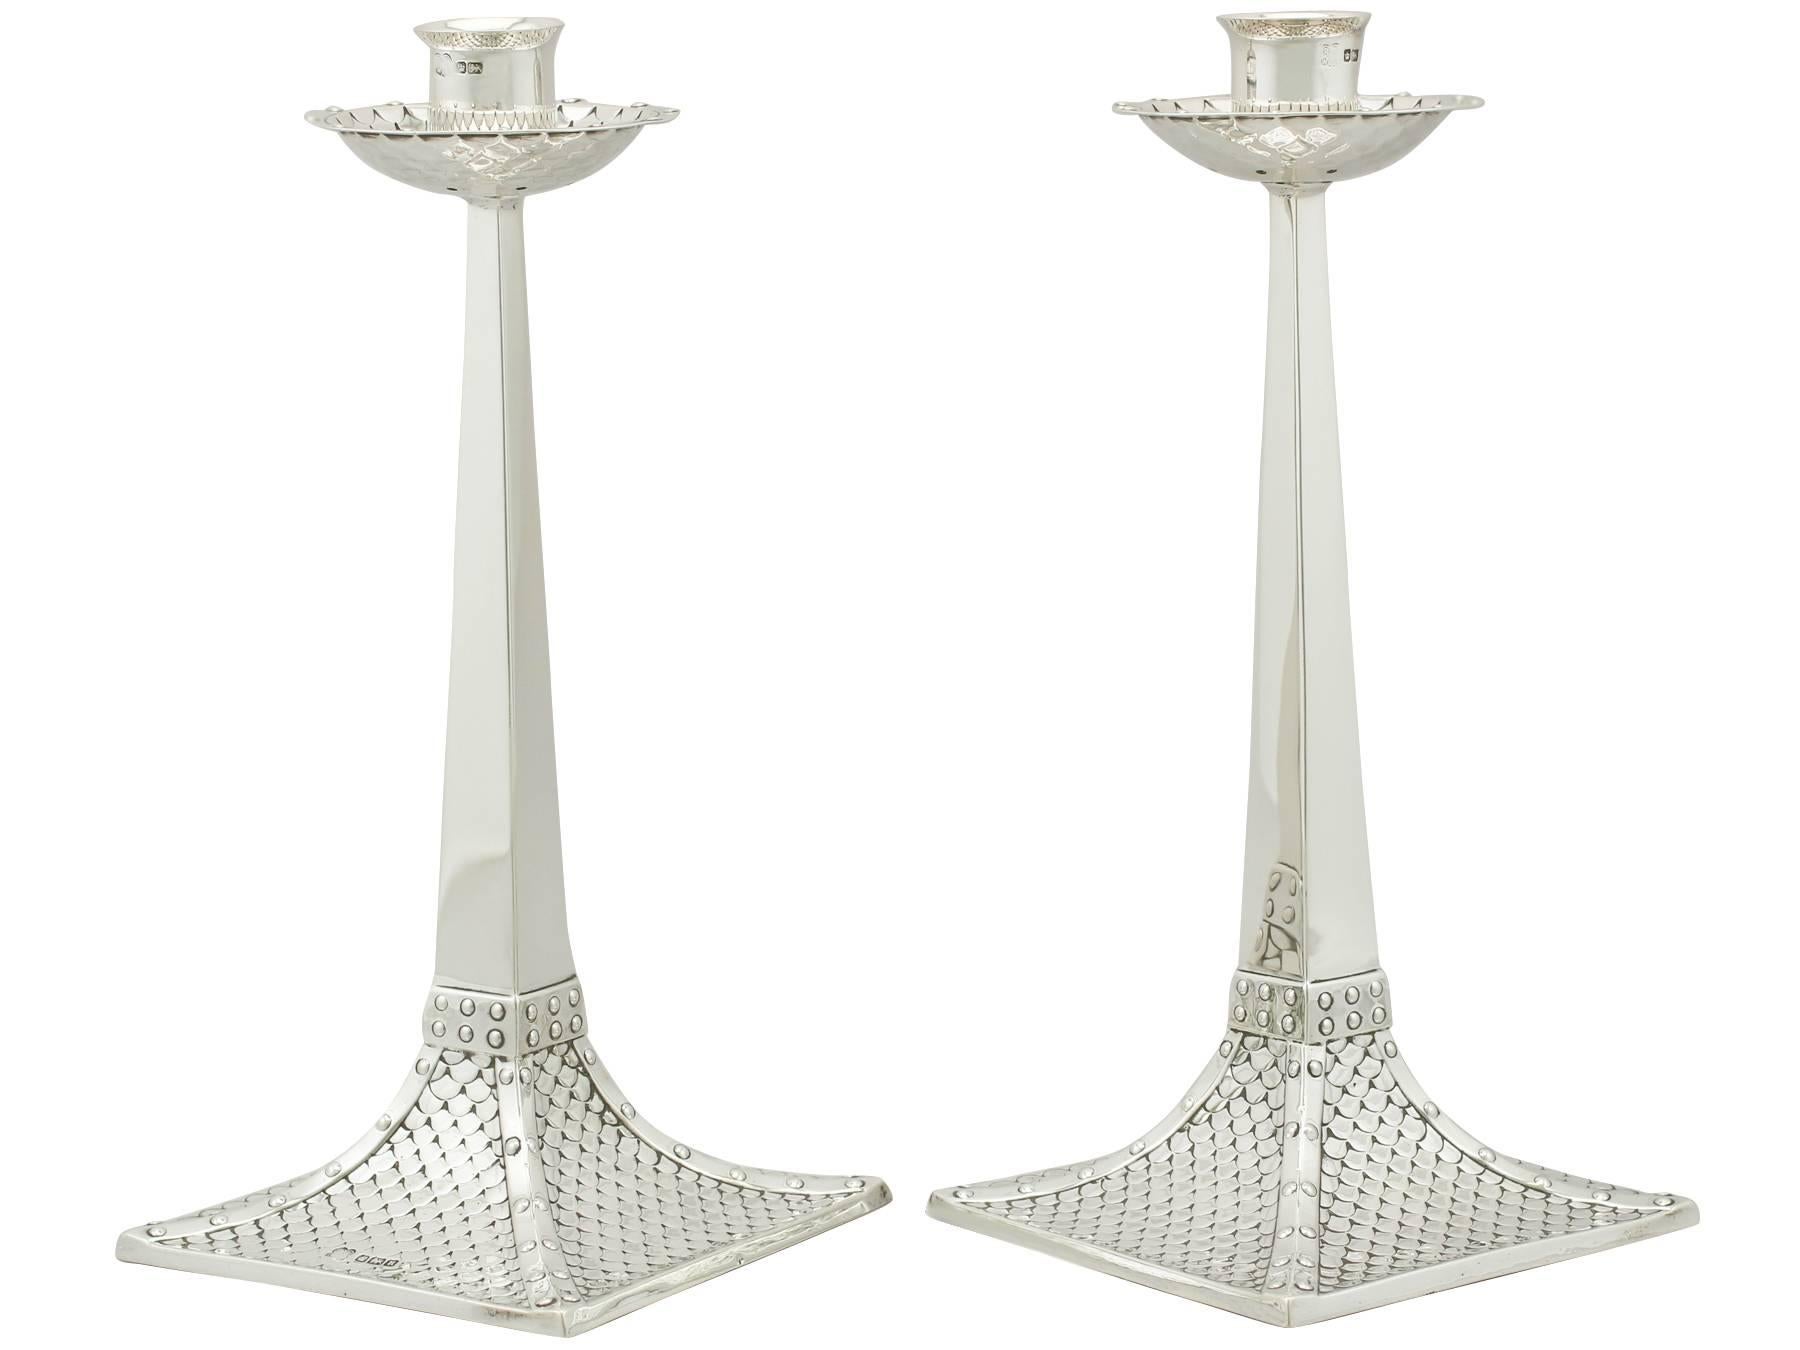 An exceptional, fine and impressive pair of antique Edwardian English sterling silver candlesticks in the Arts & Crafts style; an addition to our ornamental silverware collection.

These exceptional antique Edwardian silver candlesticks, in